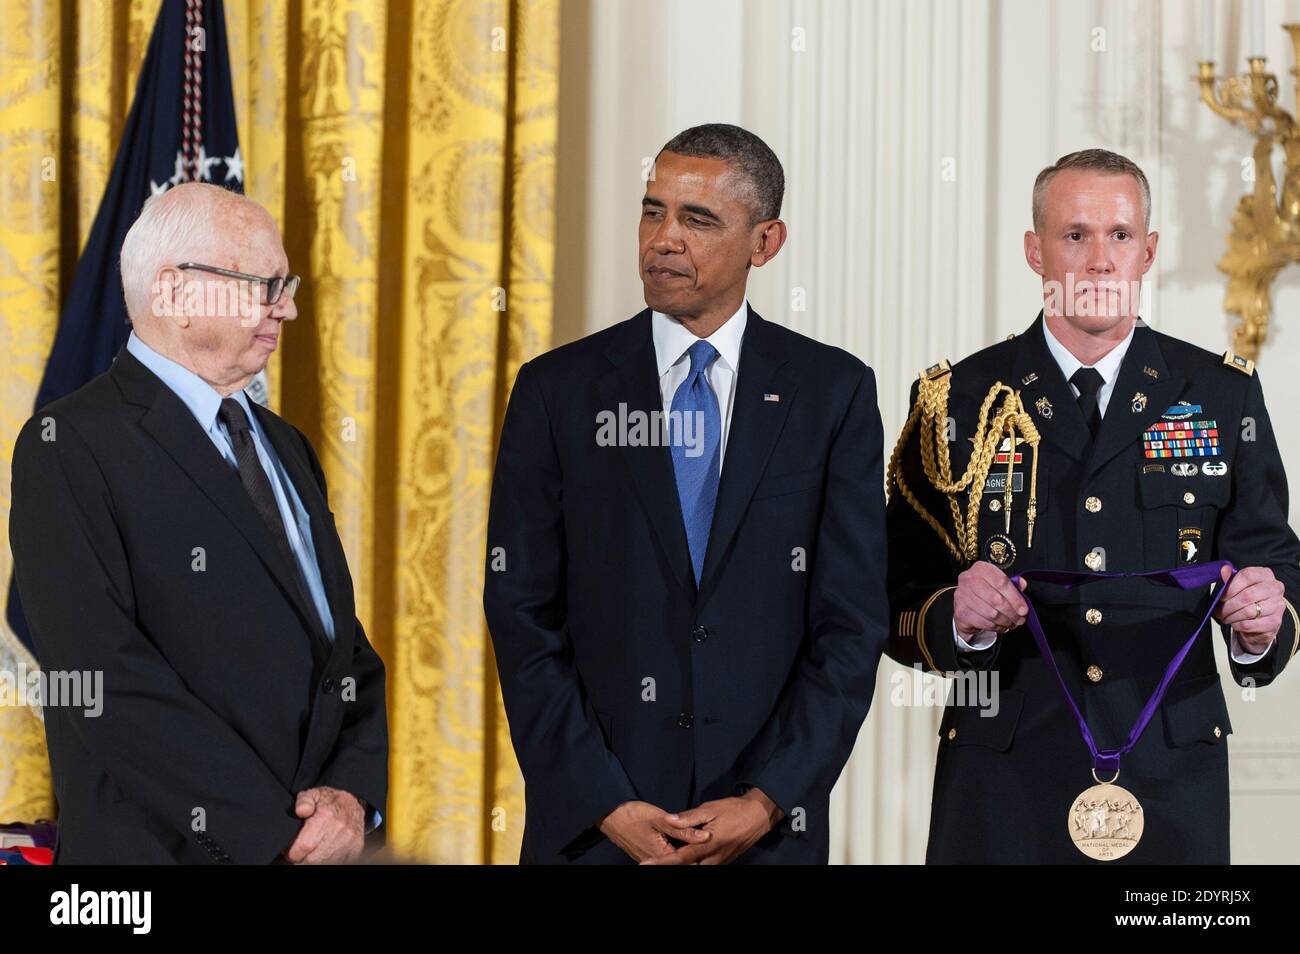 President Obama presents a 2012 National Medal of Arts to Ellsworth Kelly, for his contributions as a painter, sculptor, and printmaker, during a ceremony in the East Room of the White House on July 10, 2013 in Washington, DC. Kelly has shaped more than half a century of abstraction and remains a vital influence in American art.Photo by Pete Marovich/Pool/ABACAPRESS.COM) Stock Photo